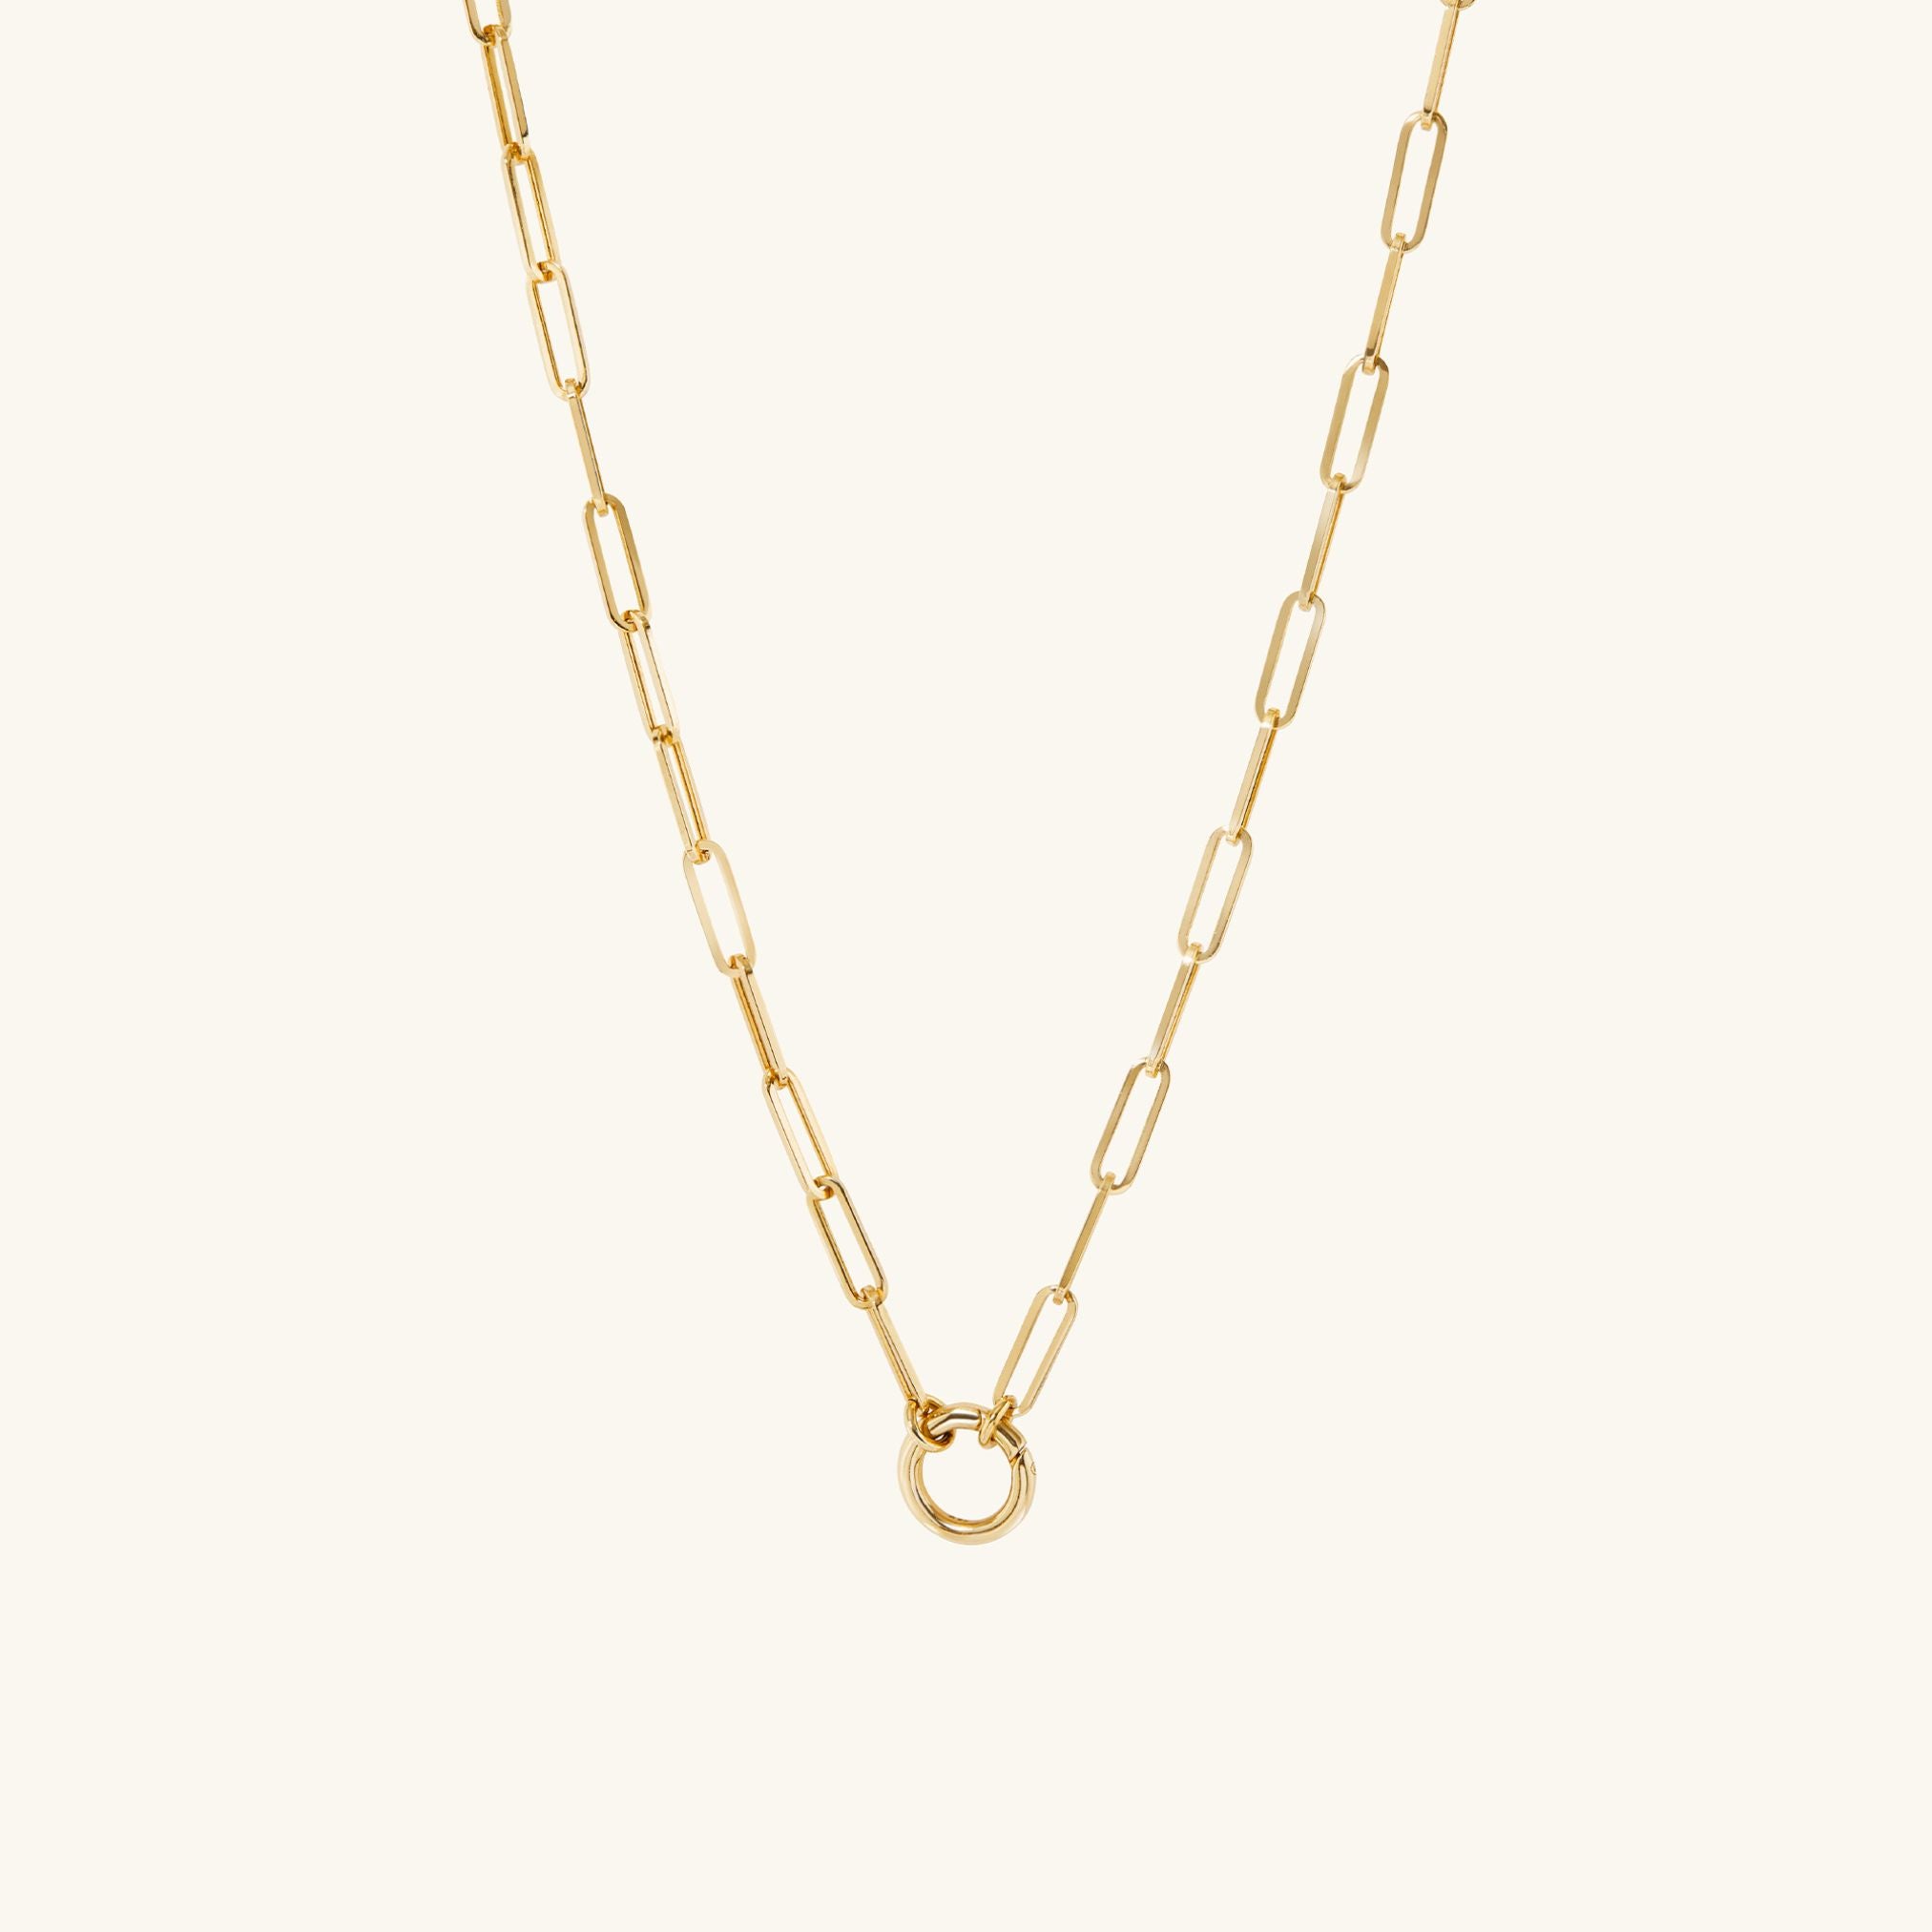 24K Gold Paperclip Chain Charm Necklace